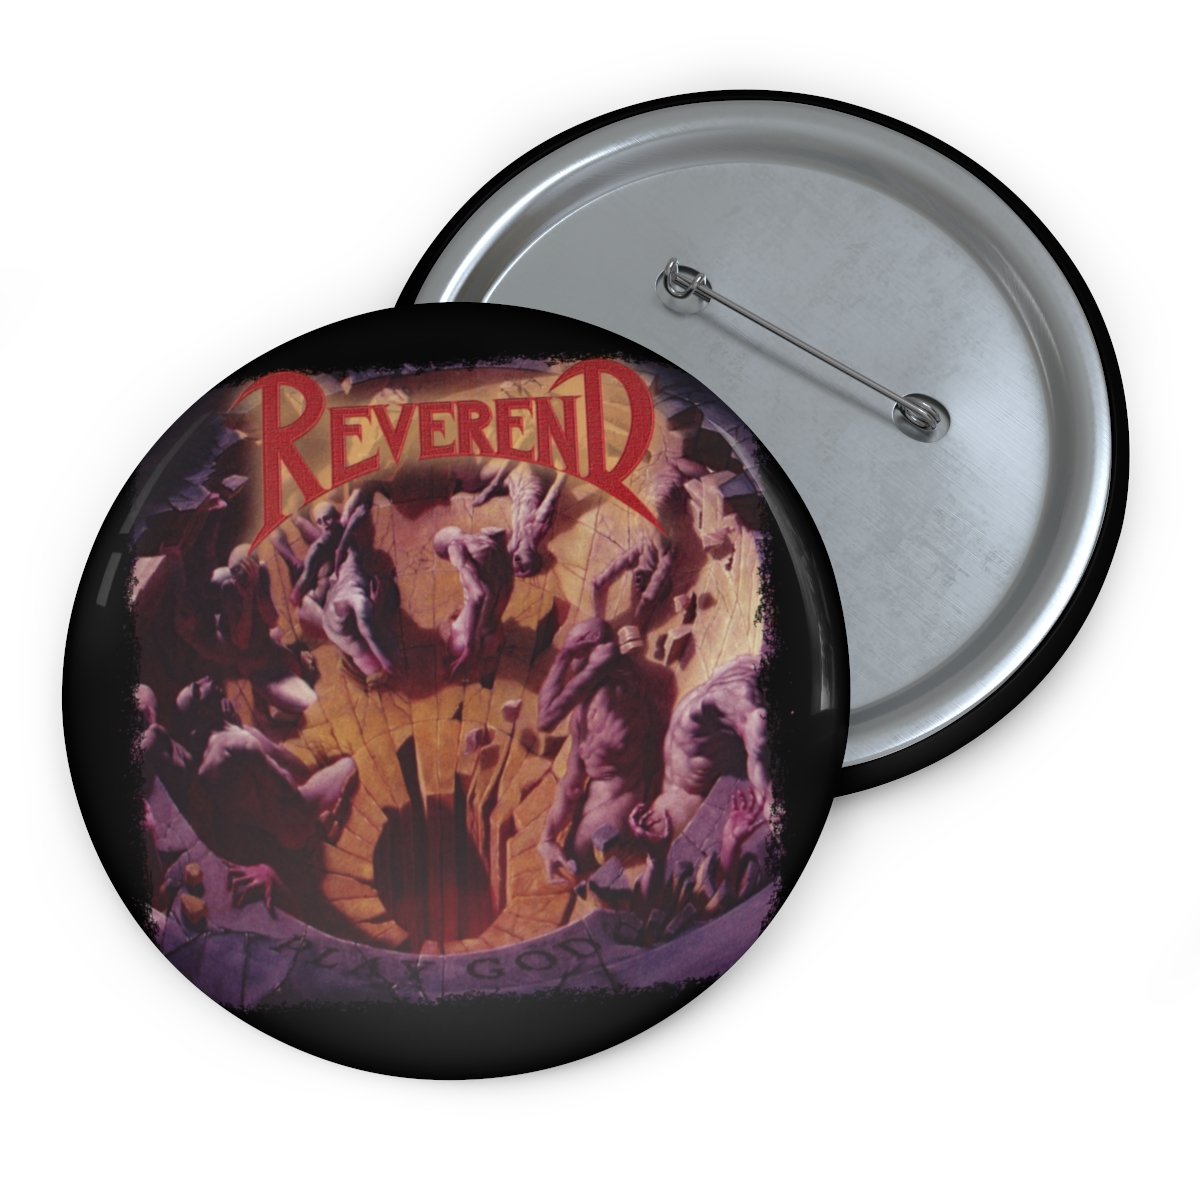 Reverend – Play God Pin Buttons